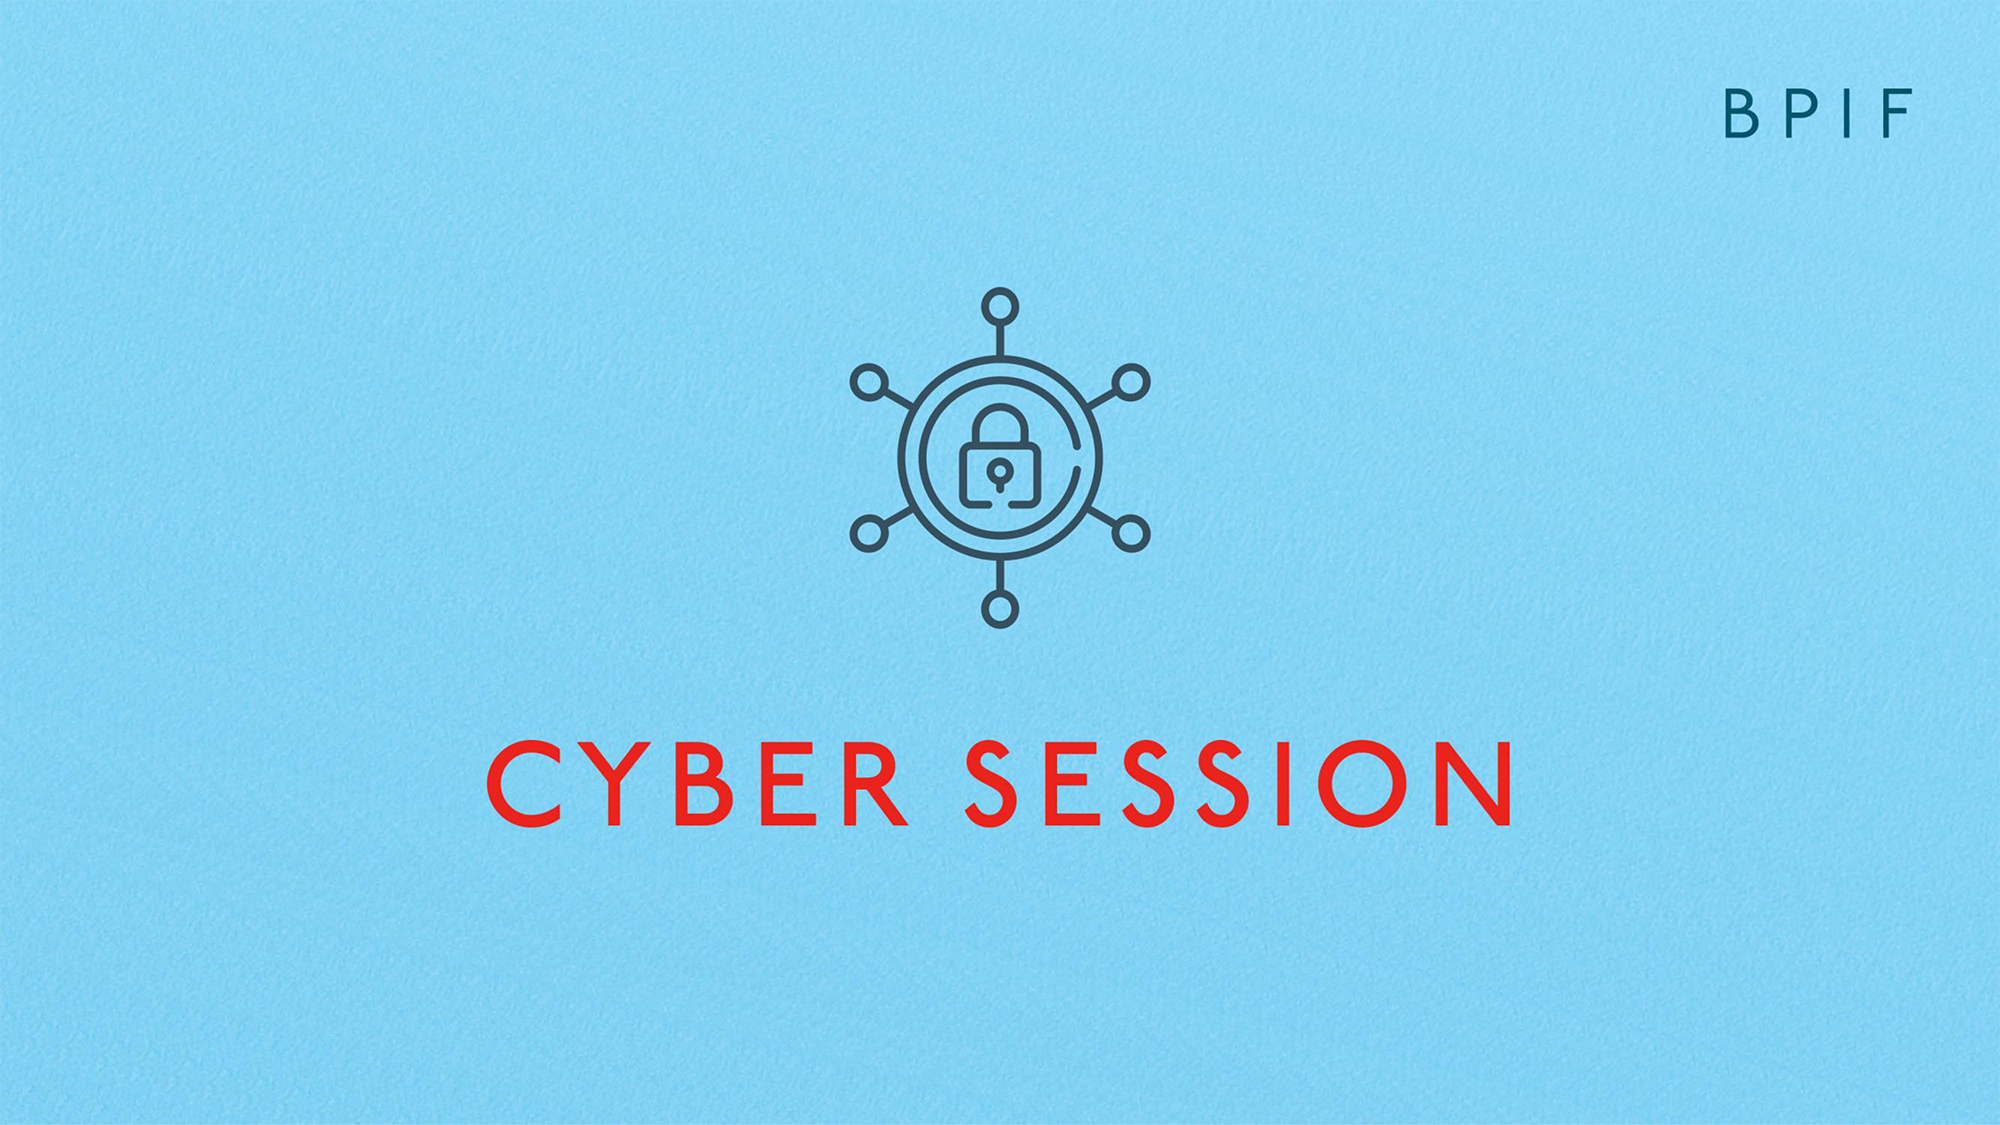 BPIF Members’ day 2021 – Cyber security session